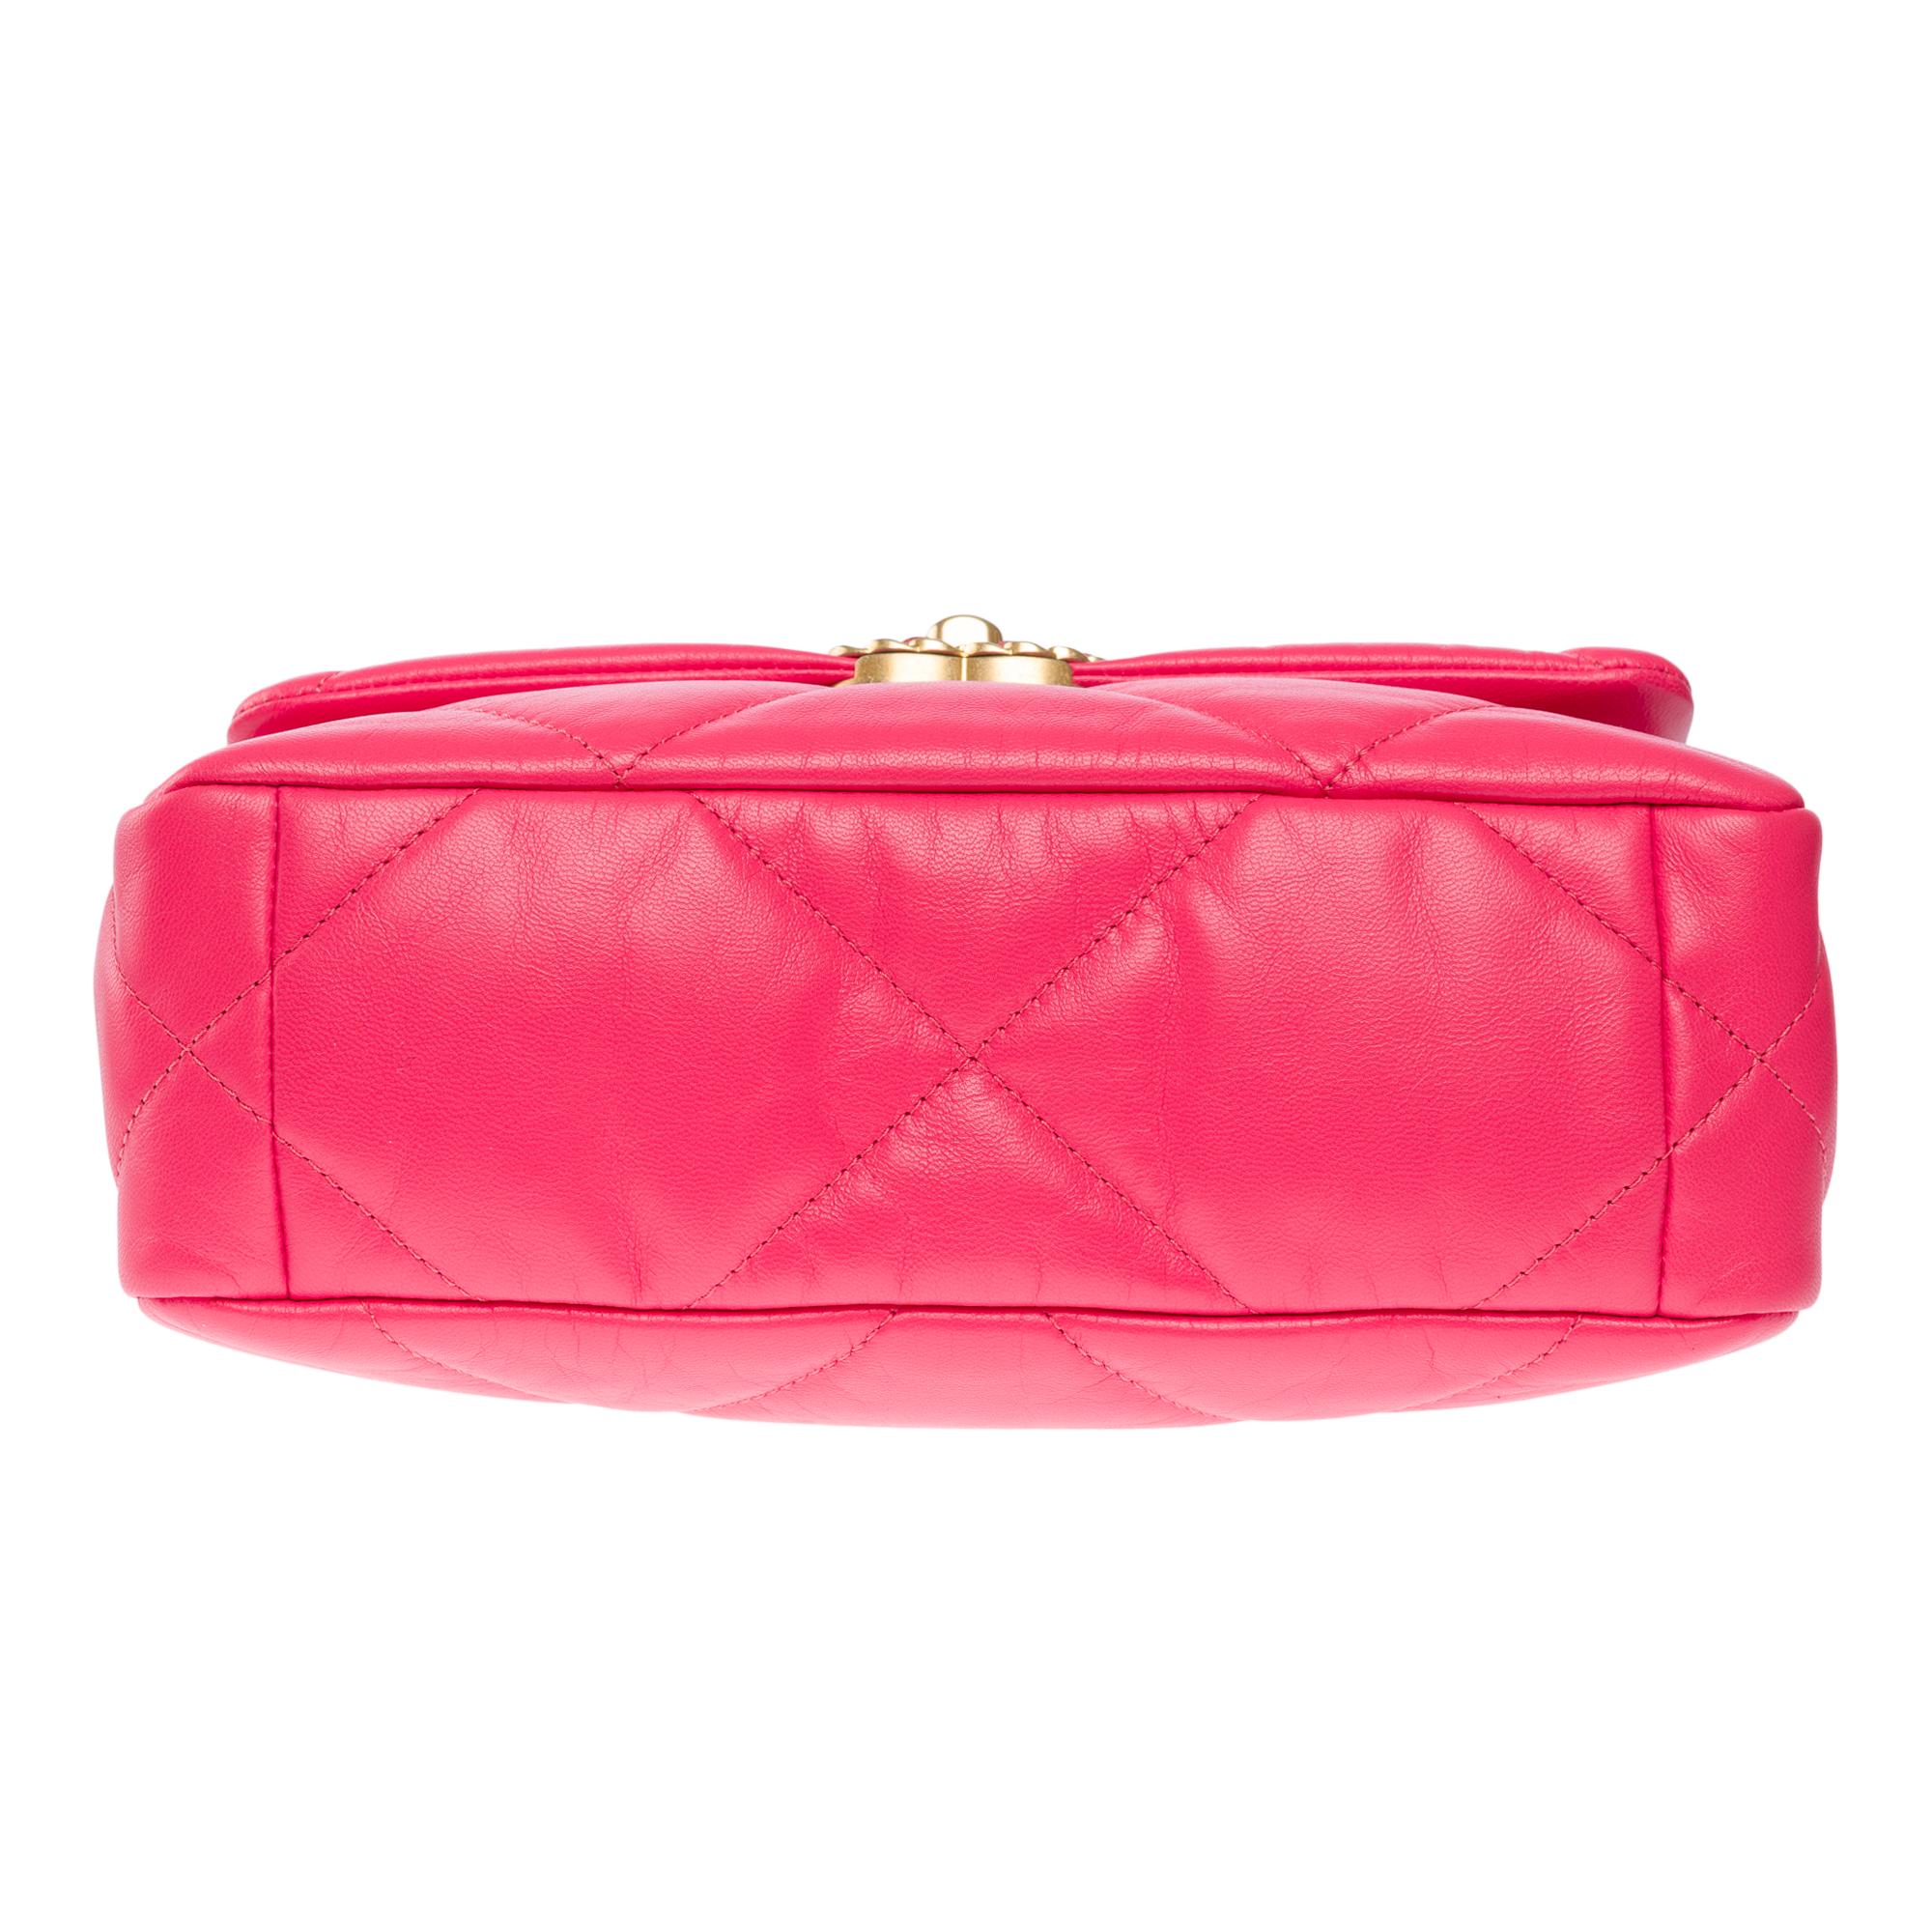 Stunning Chanel 19 shoulder bag in Pink quilted leather , Matt gold and SHW 8